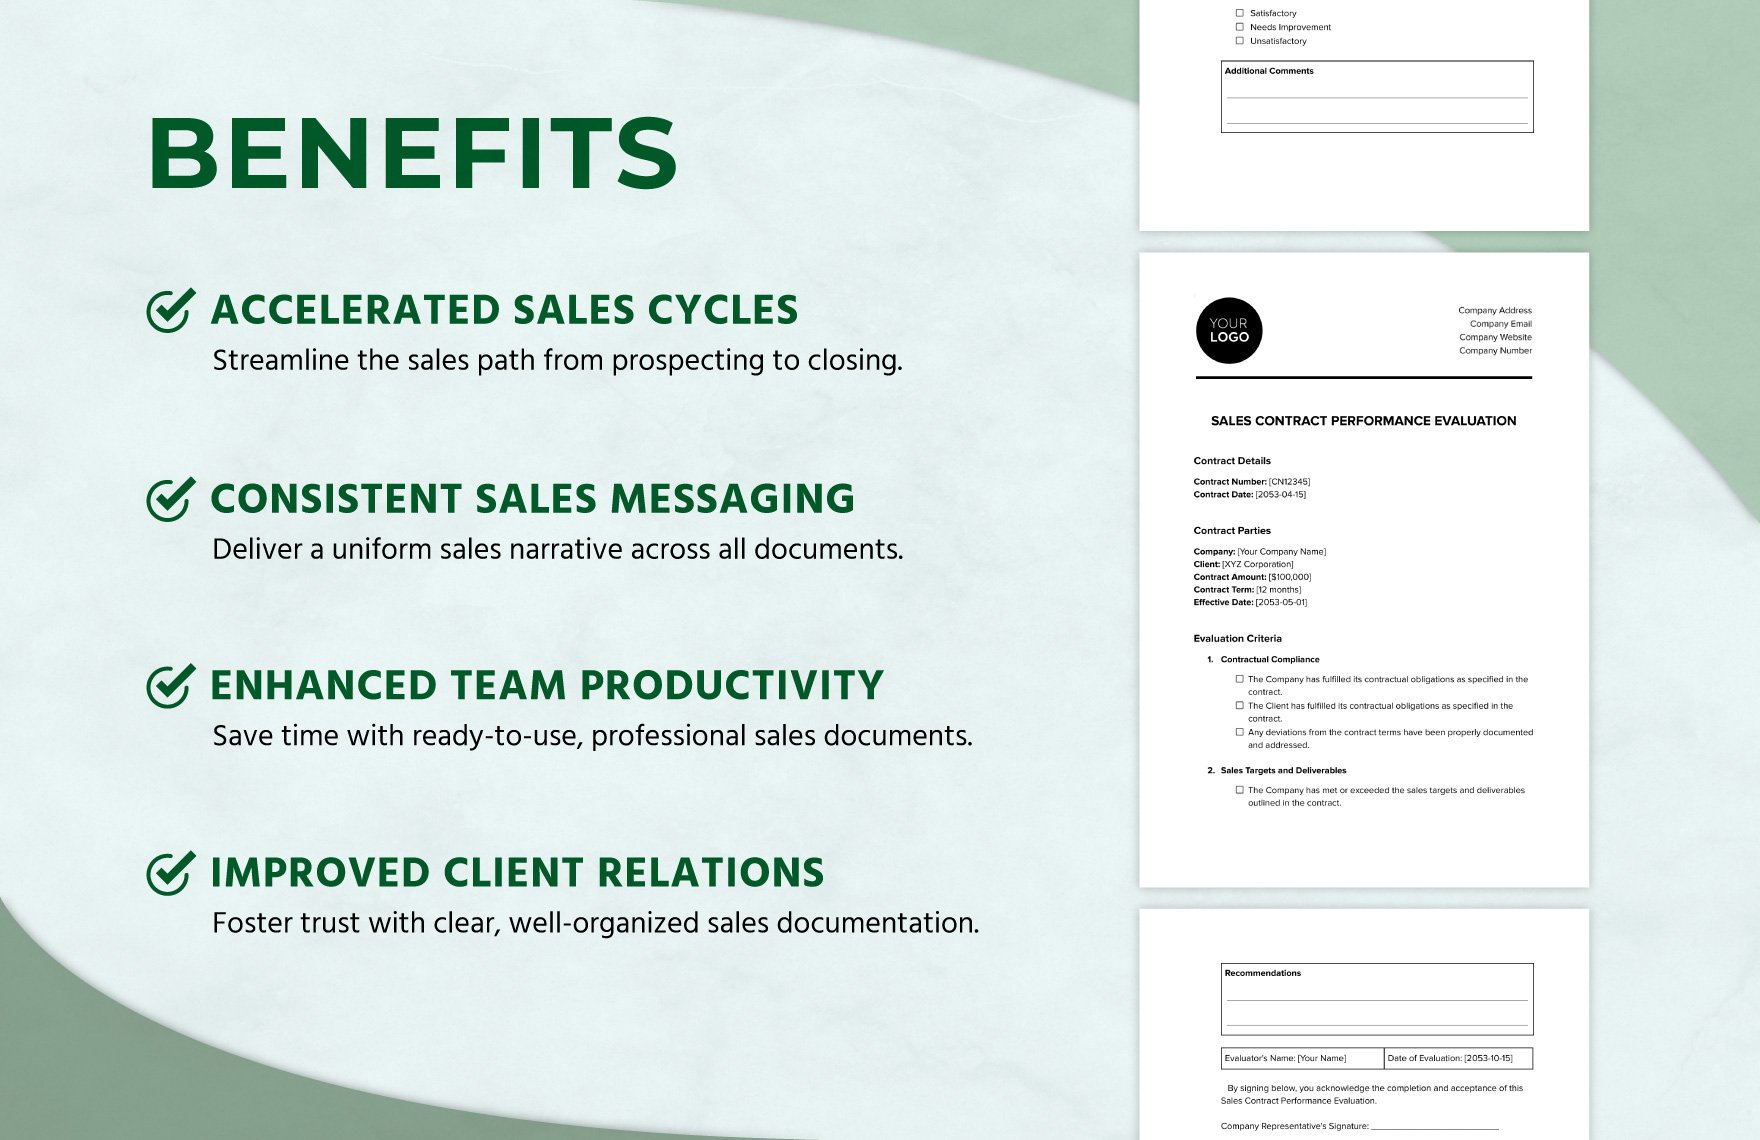 Sales Contract Performance Evaluation Template